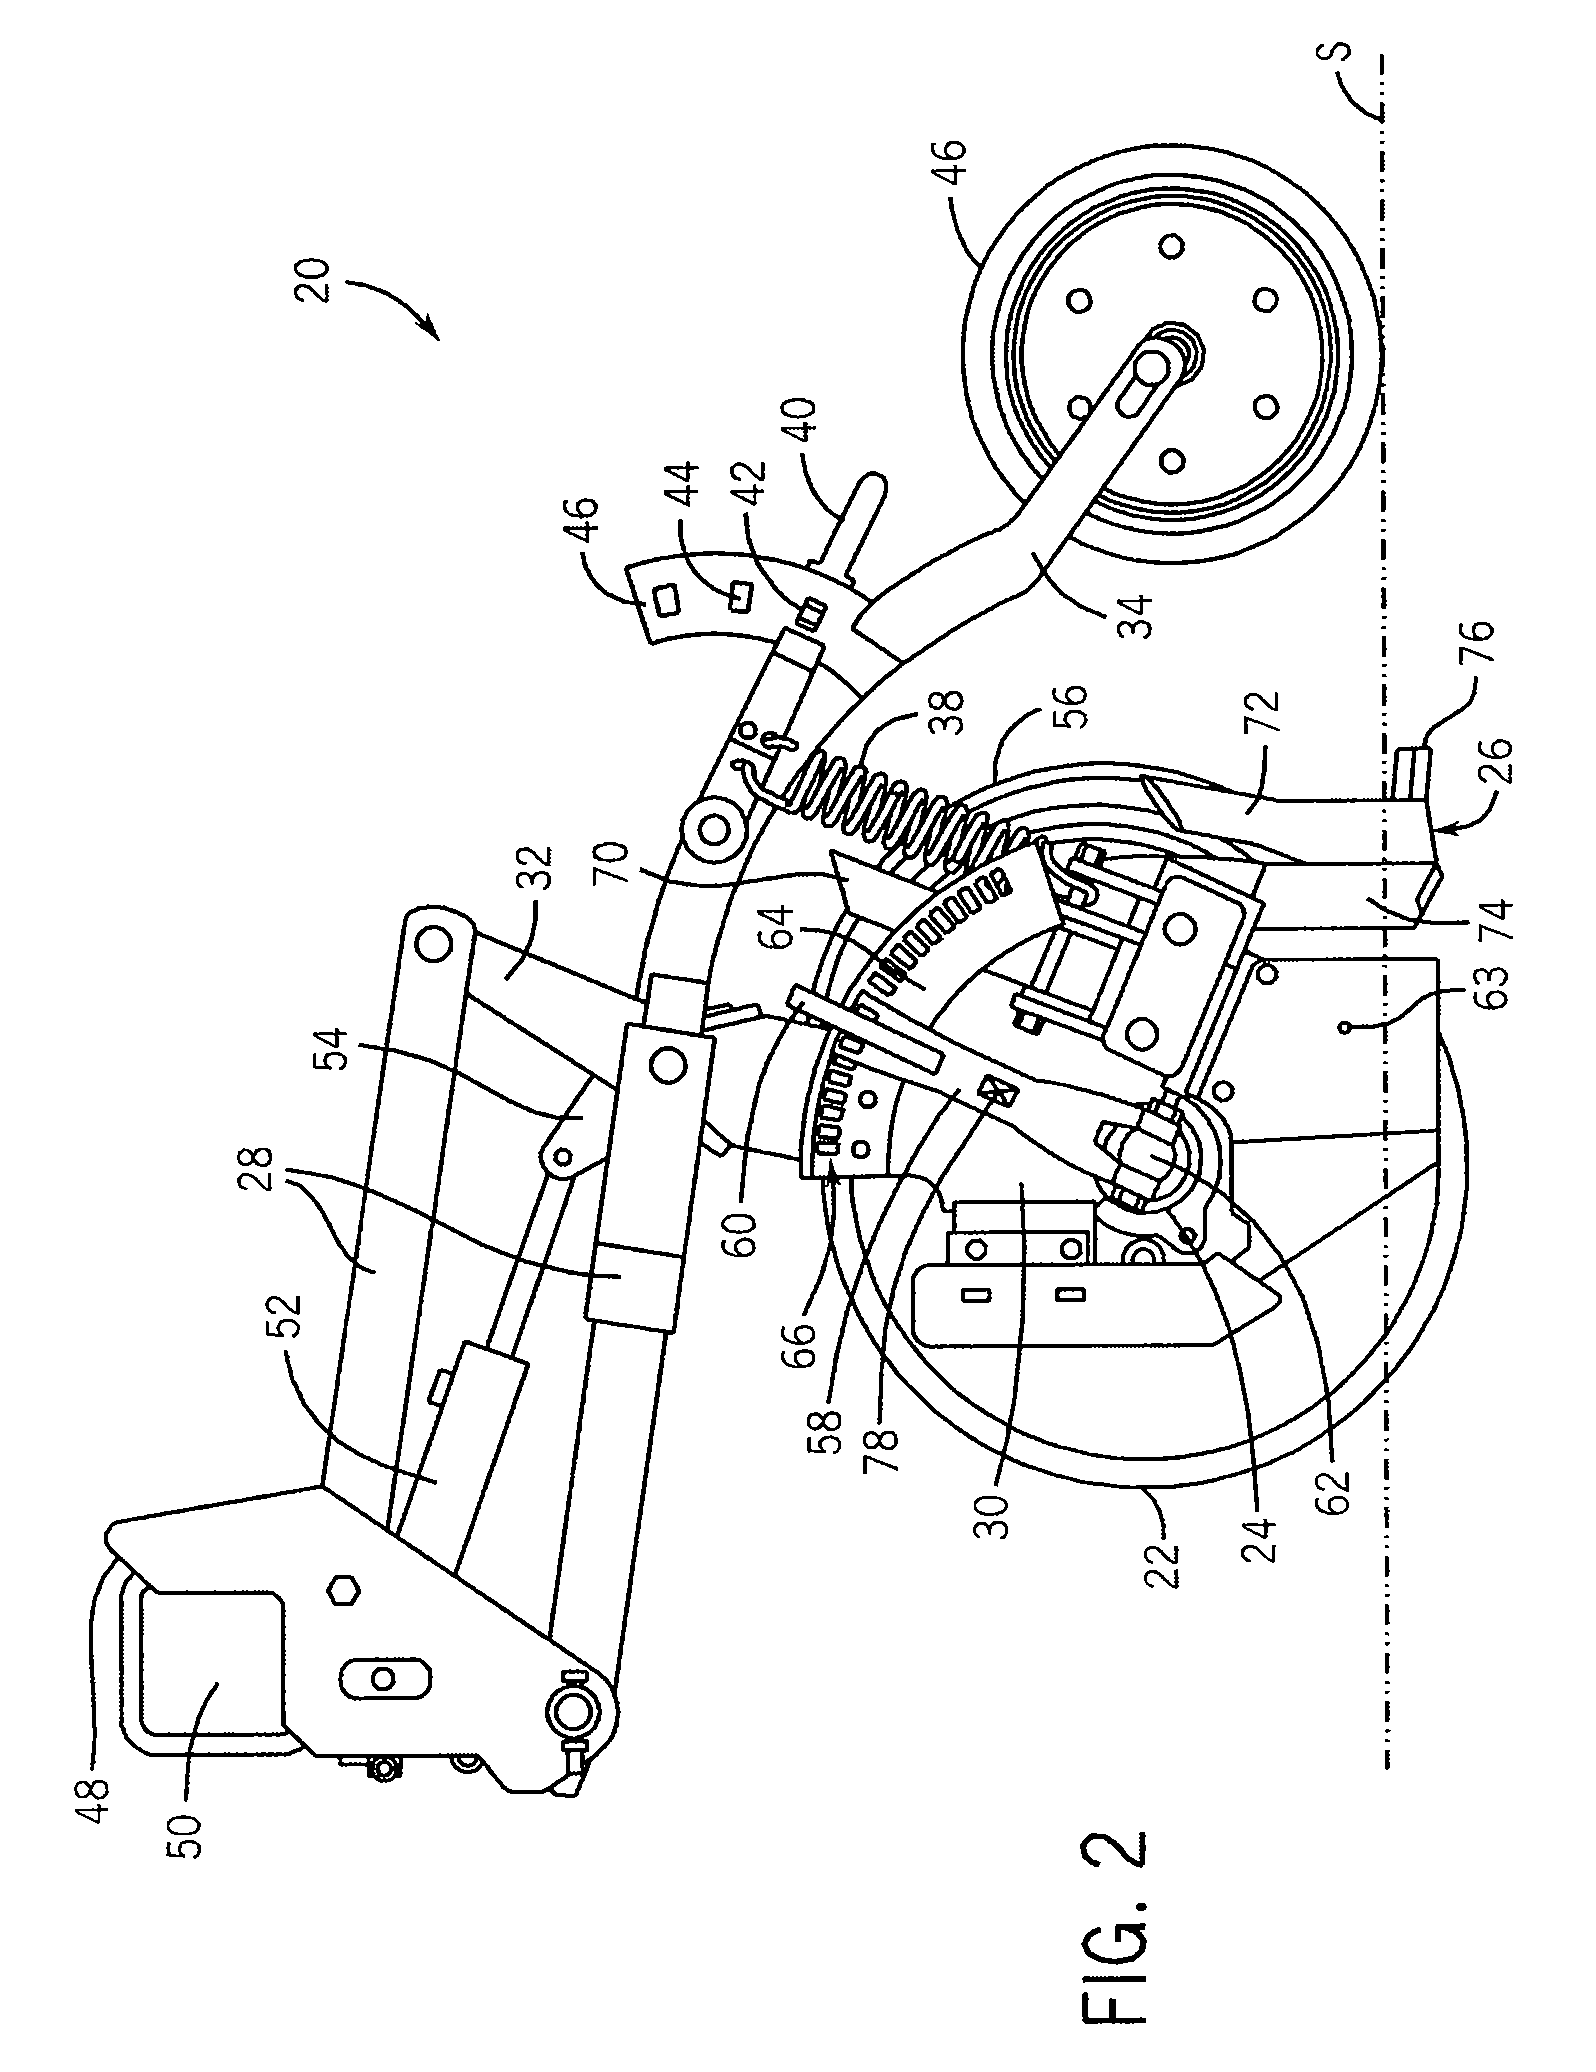 Automatic down pressure adjustment system for set of ganged disc openers